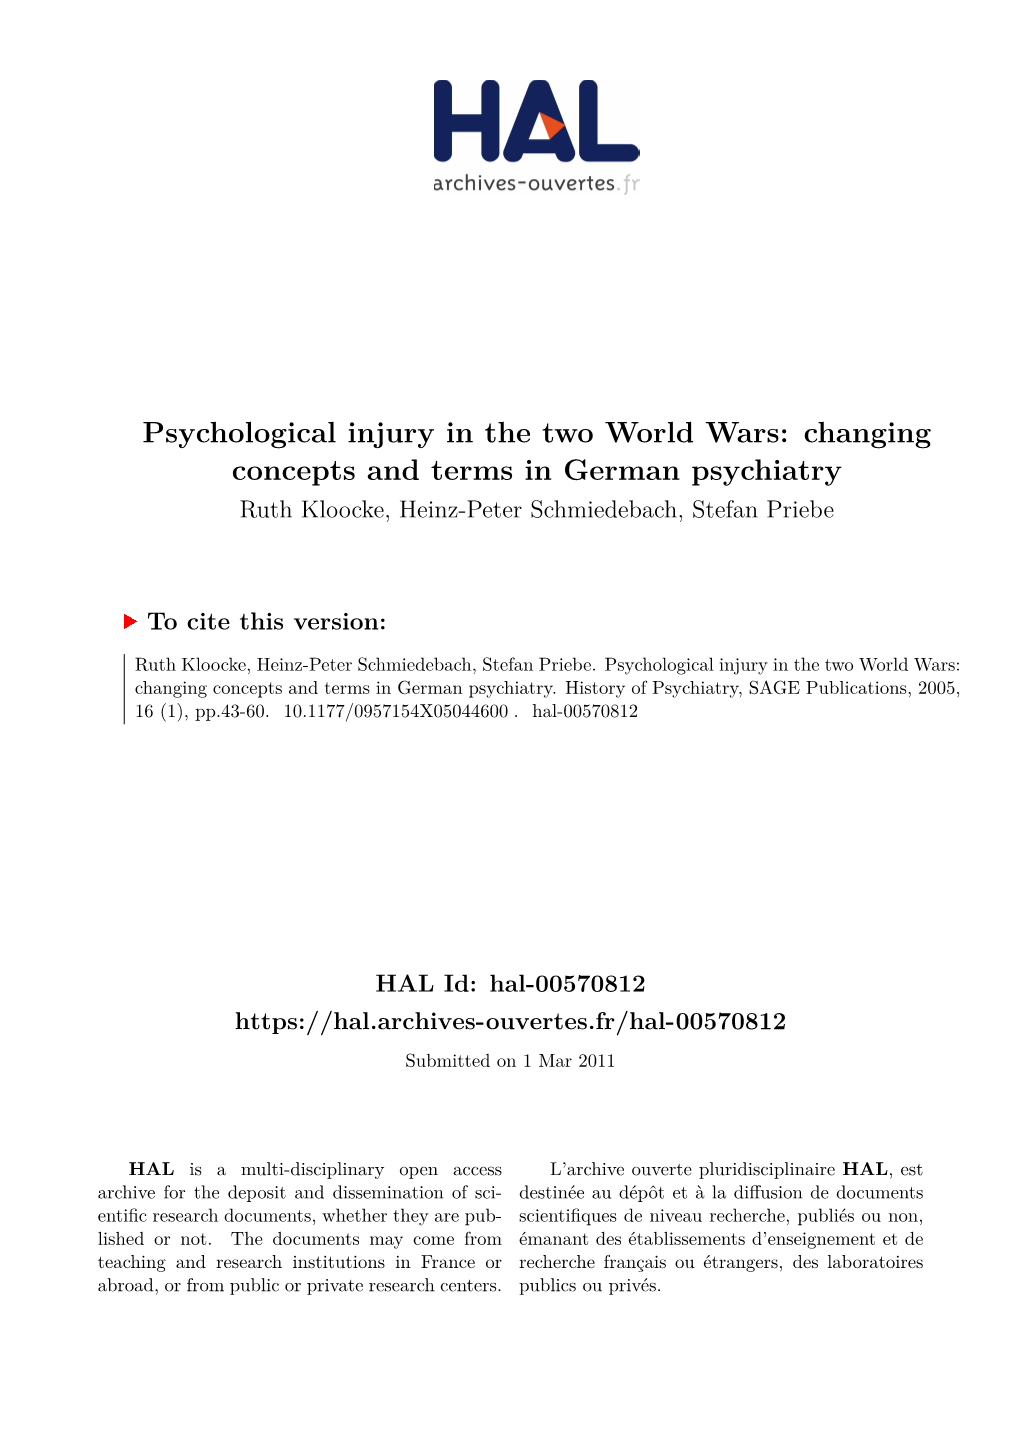 Psychological Injury in the Two World Wars: Changing Concepts and Terms in German Psychiatry Ruth Kloocke, Heinz-Peter Schmiedebach, Stefan Priebe